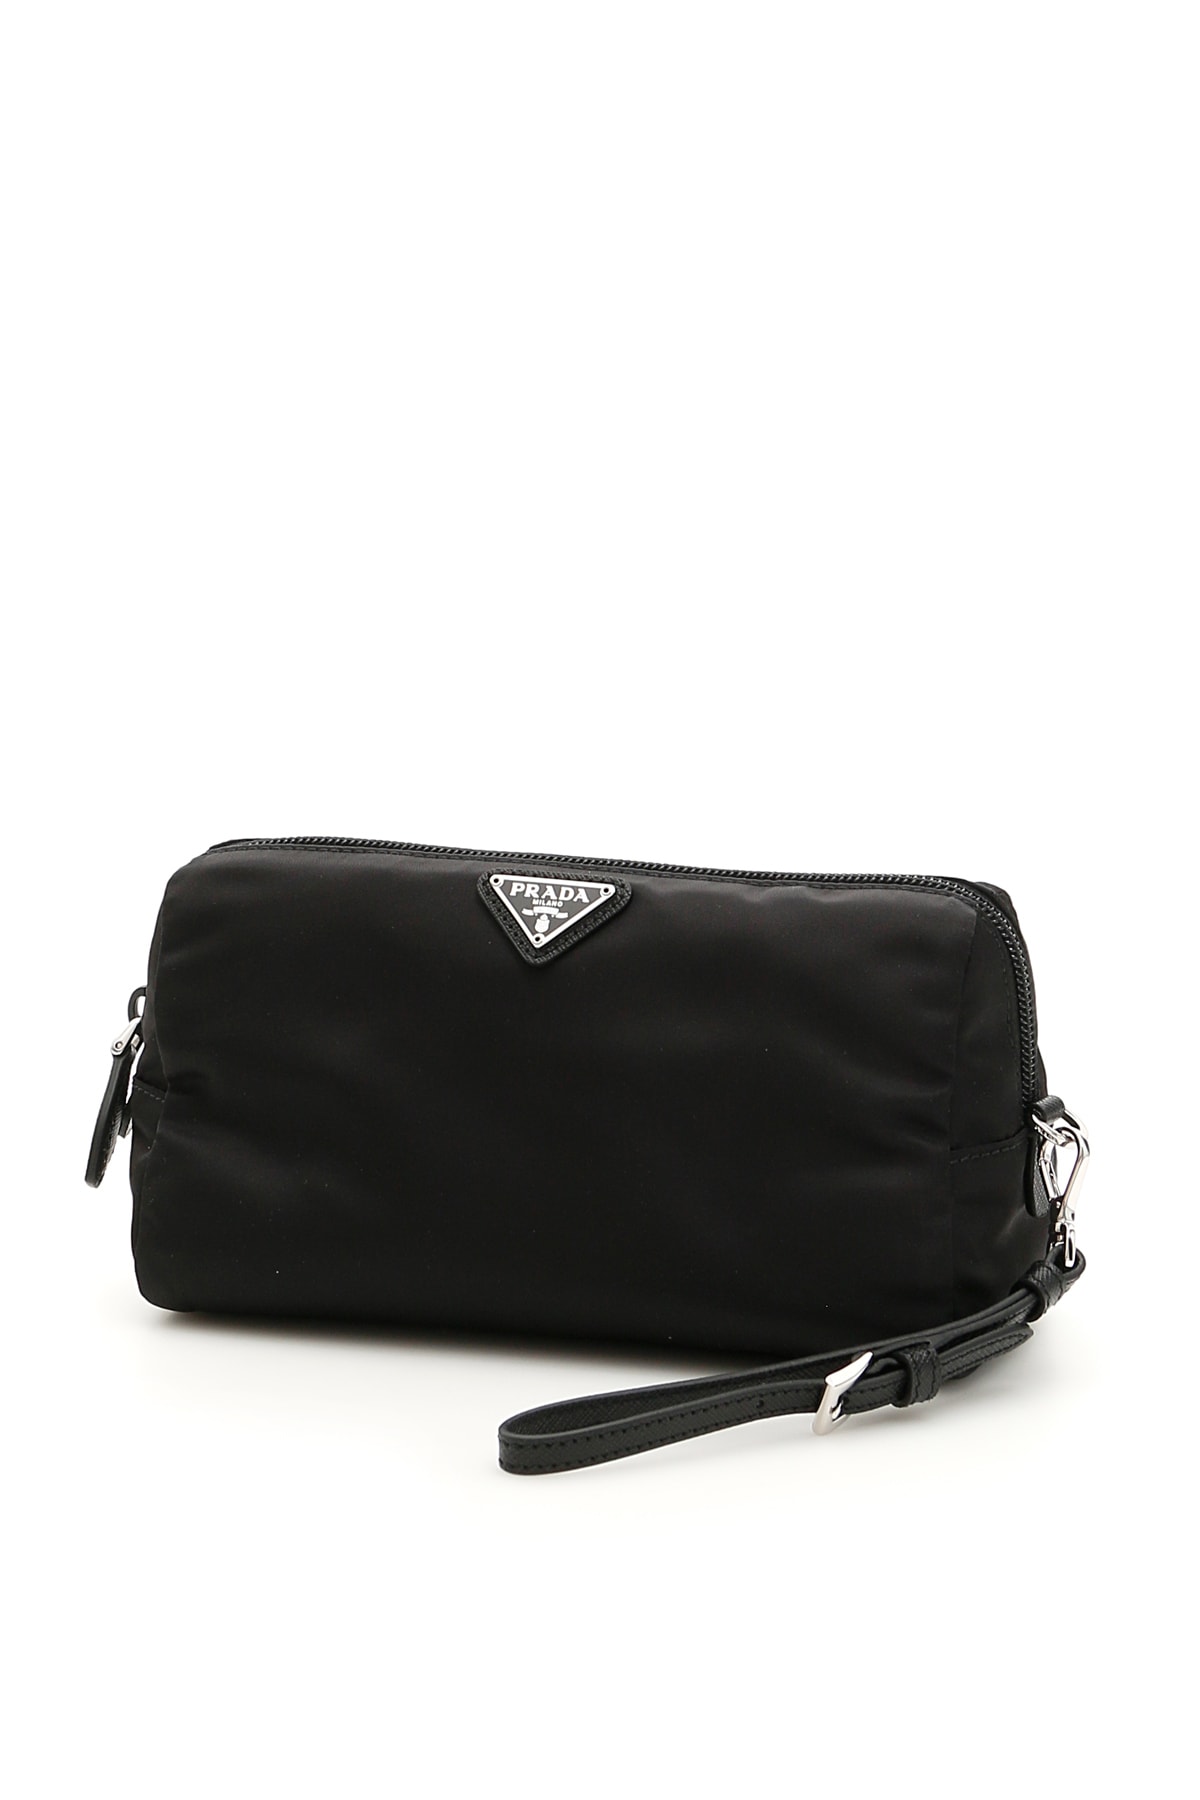 Prada Pouch With Handle